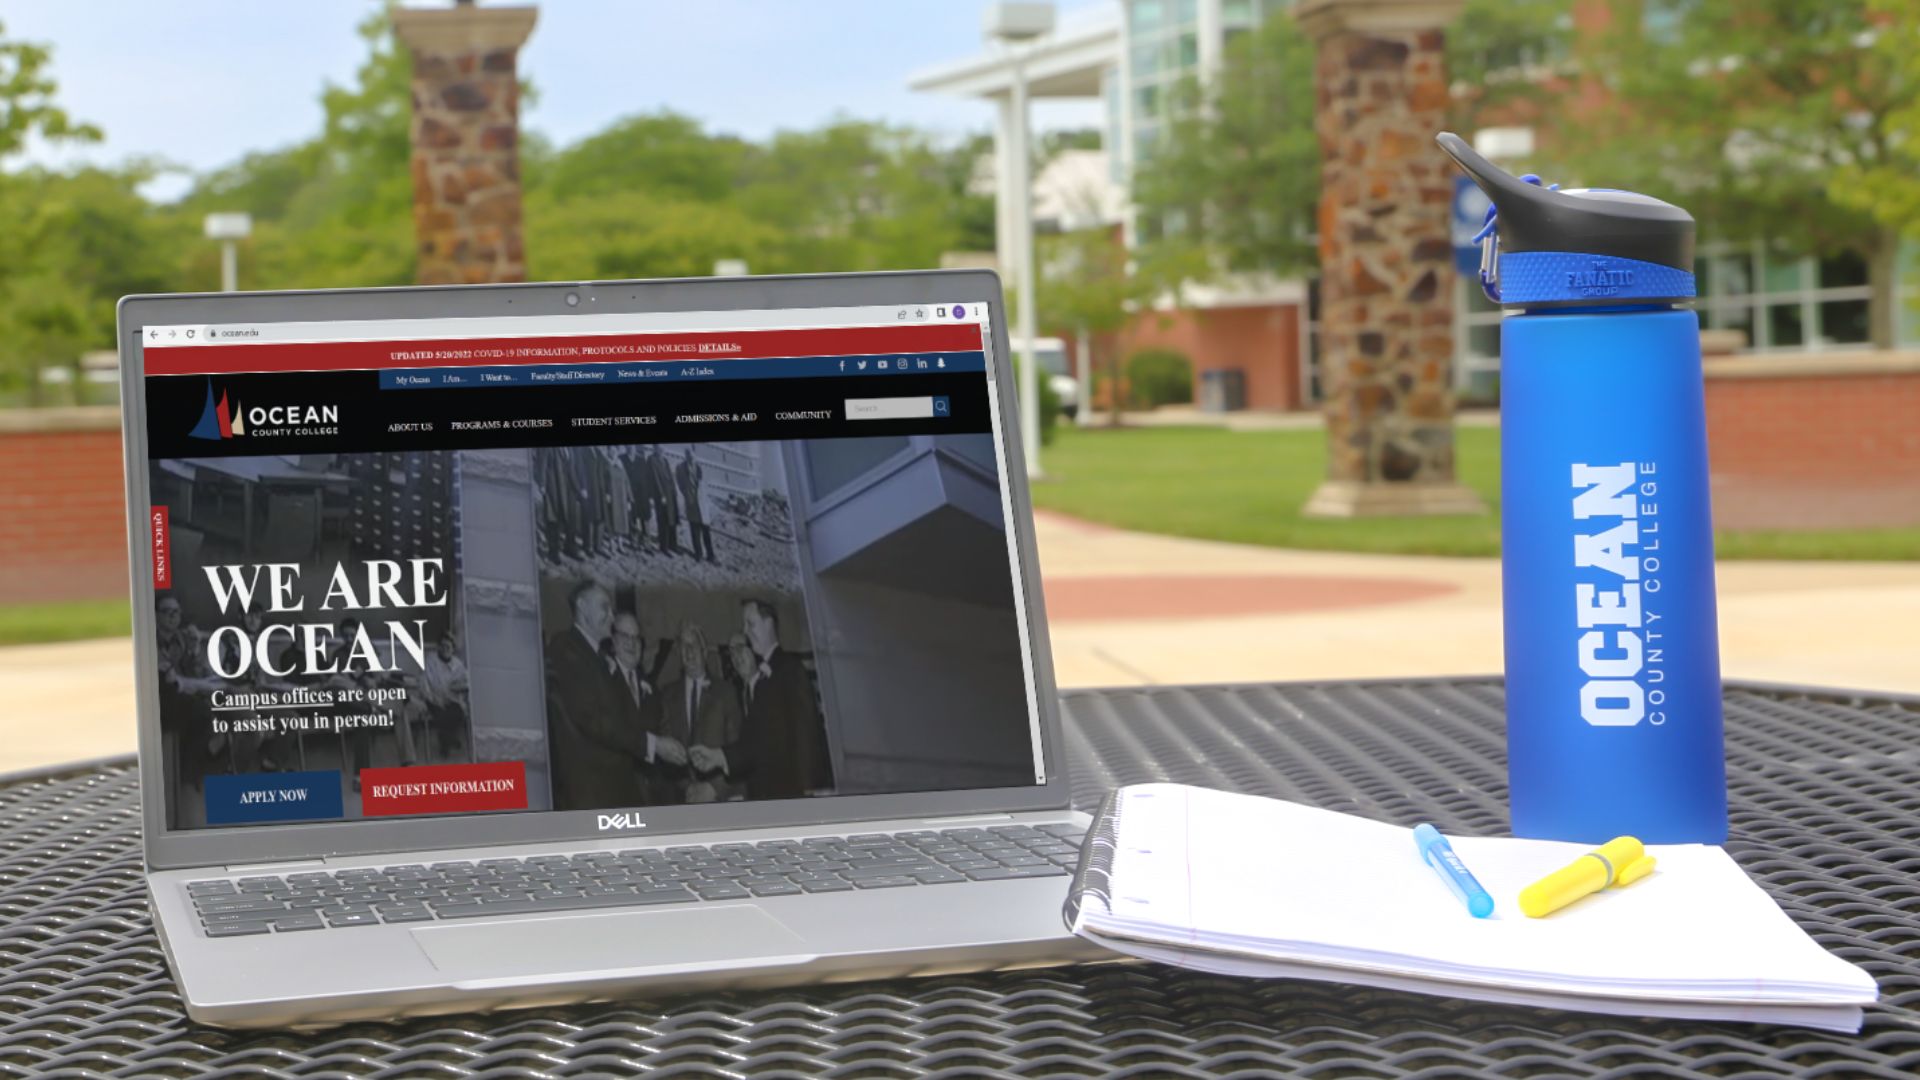 Laptop open to Ocean County College's website looking to complete a Transcript Request